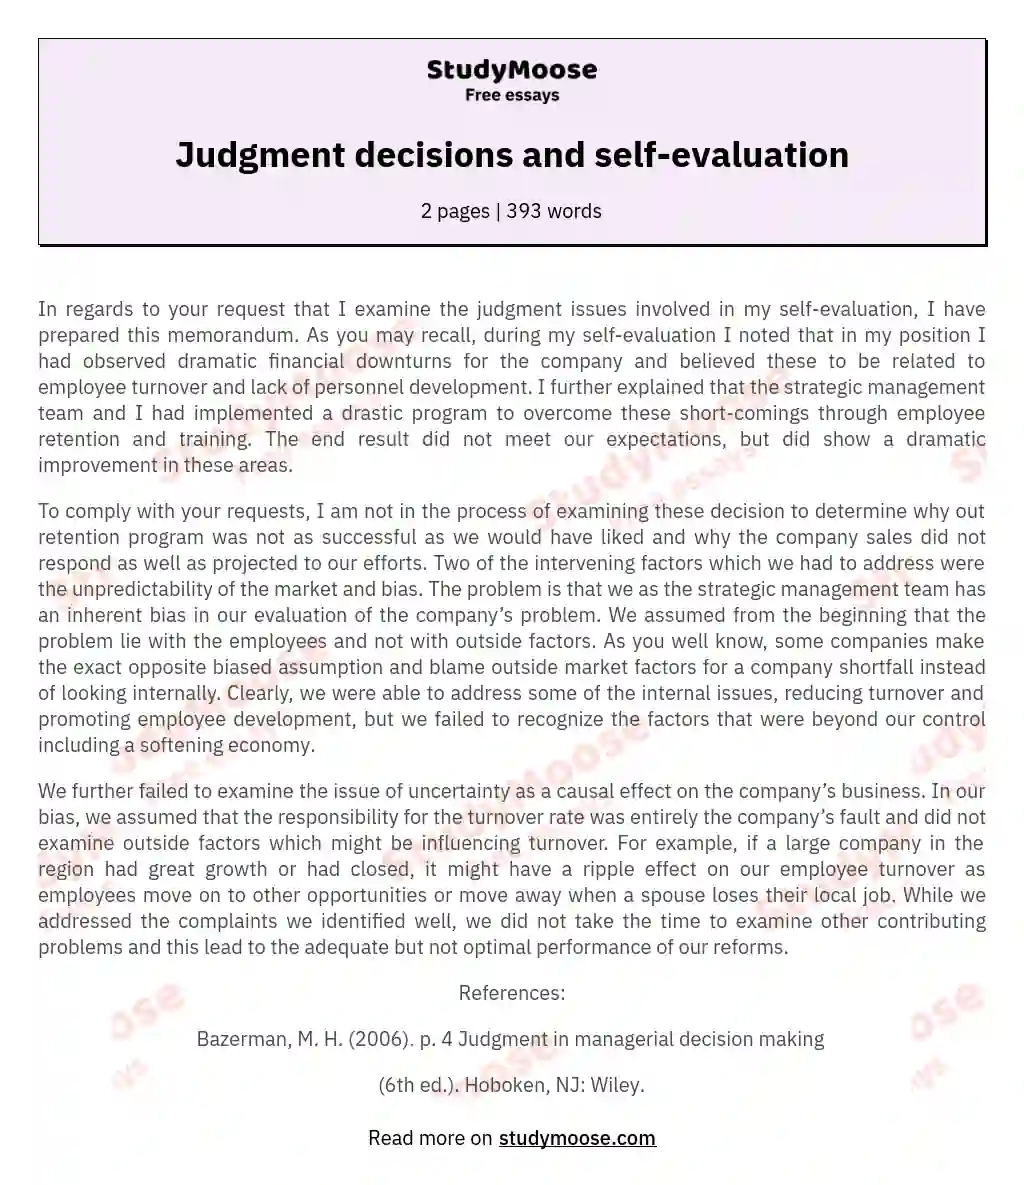 Judgment decisions and self-evaluation essay